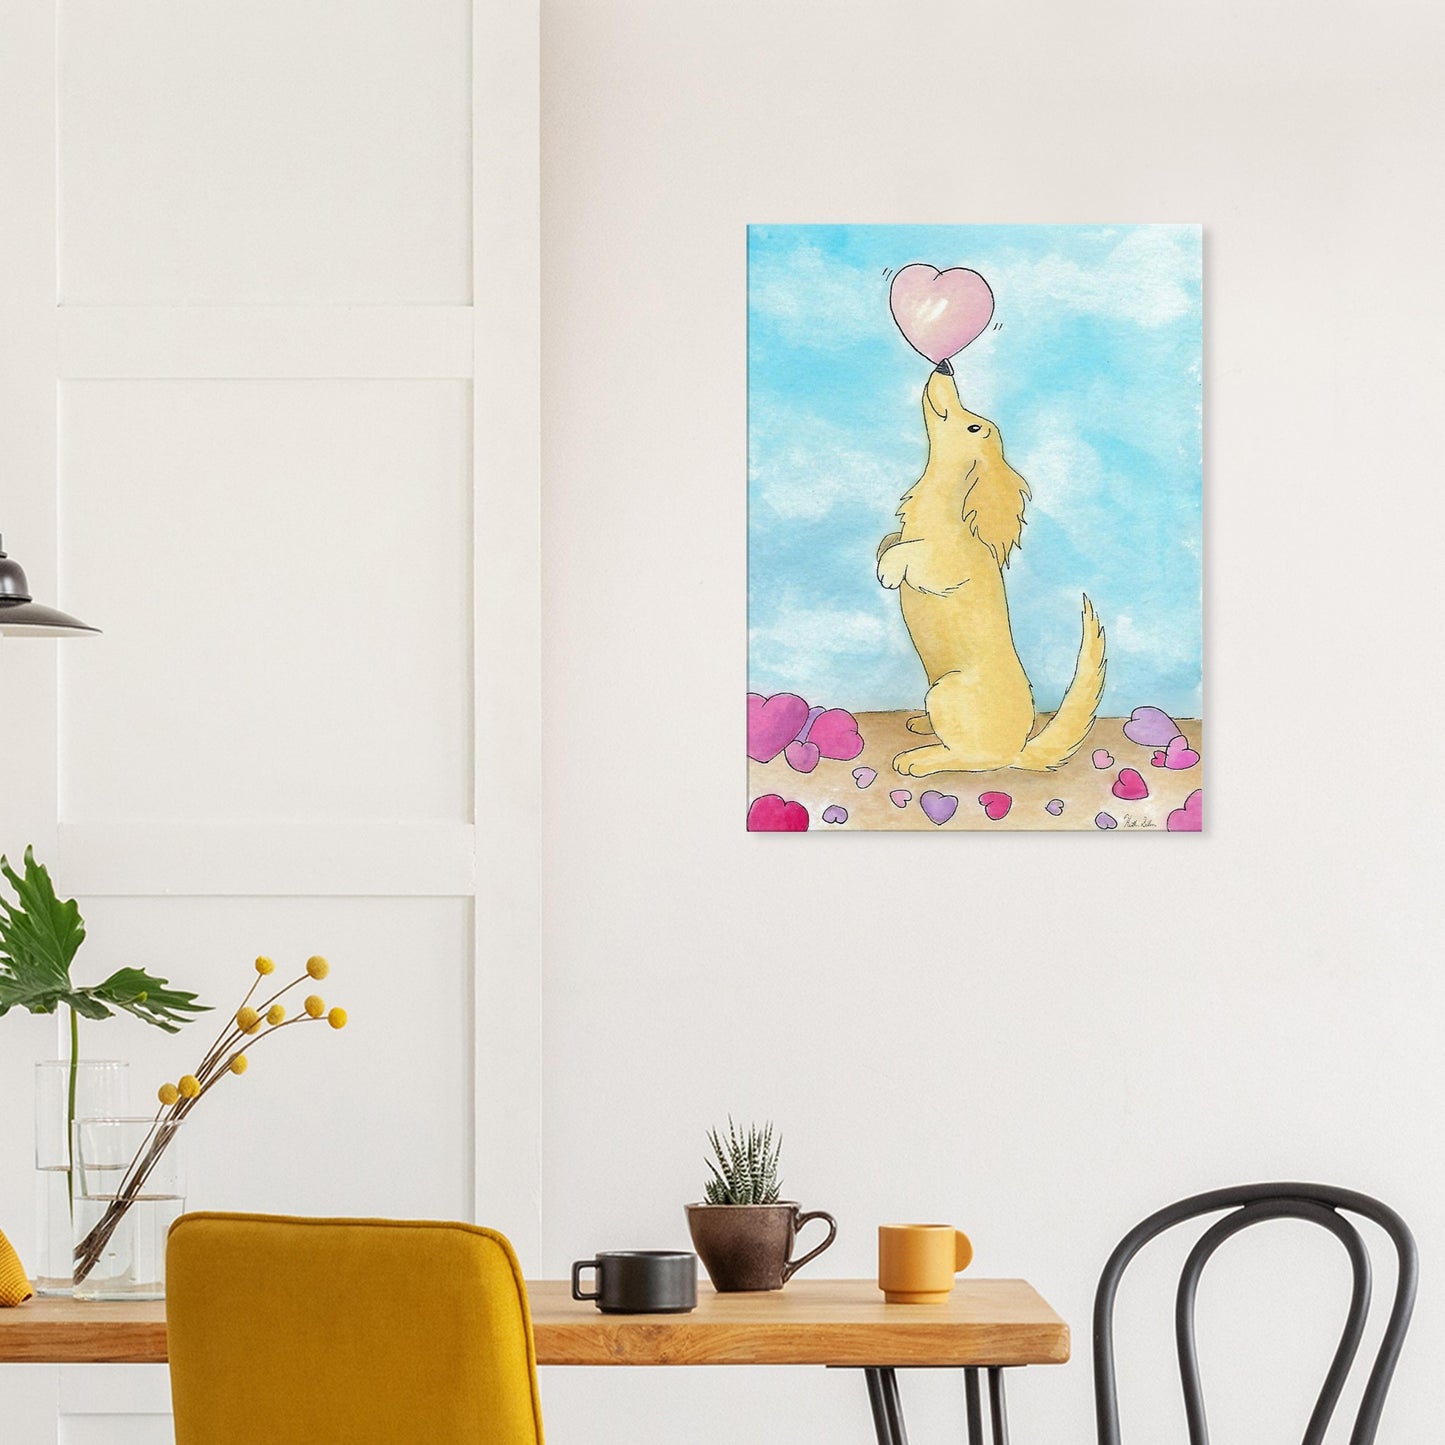 24 by 32 inch canvas wall art print of Heather Silver's watercolor painting, Puppy Love. It features a cute dog balancing a pink heart on its nose against a blue sky background. Canvas shown on wall above kitchen table and chairs.